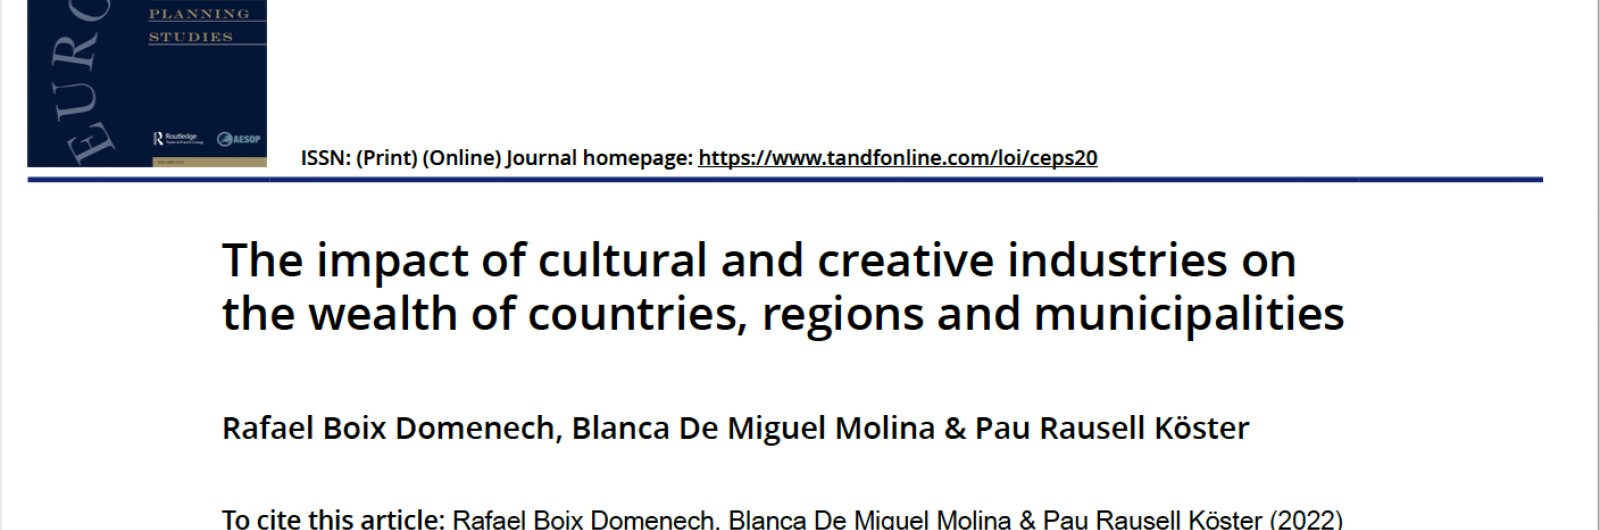 The impact of cultural and creative industries on the wealth of countries regions and municipalities